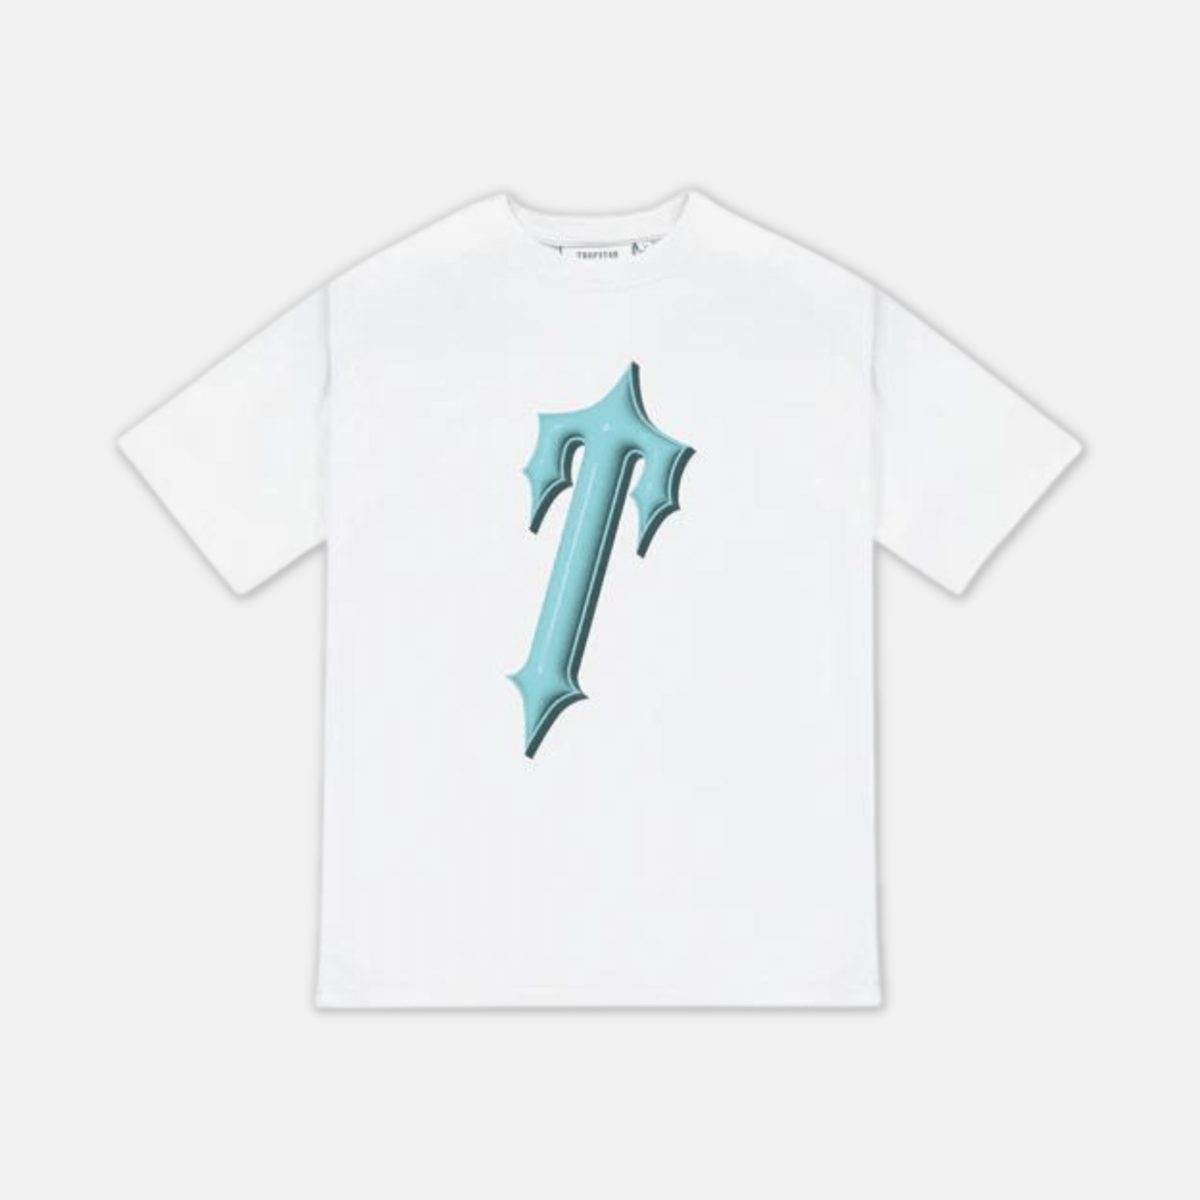 Trapstar Decoded T-Shirt - White/Teal - No Sauce The Plug